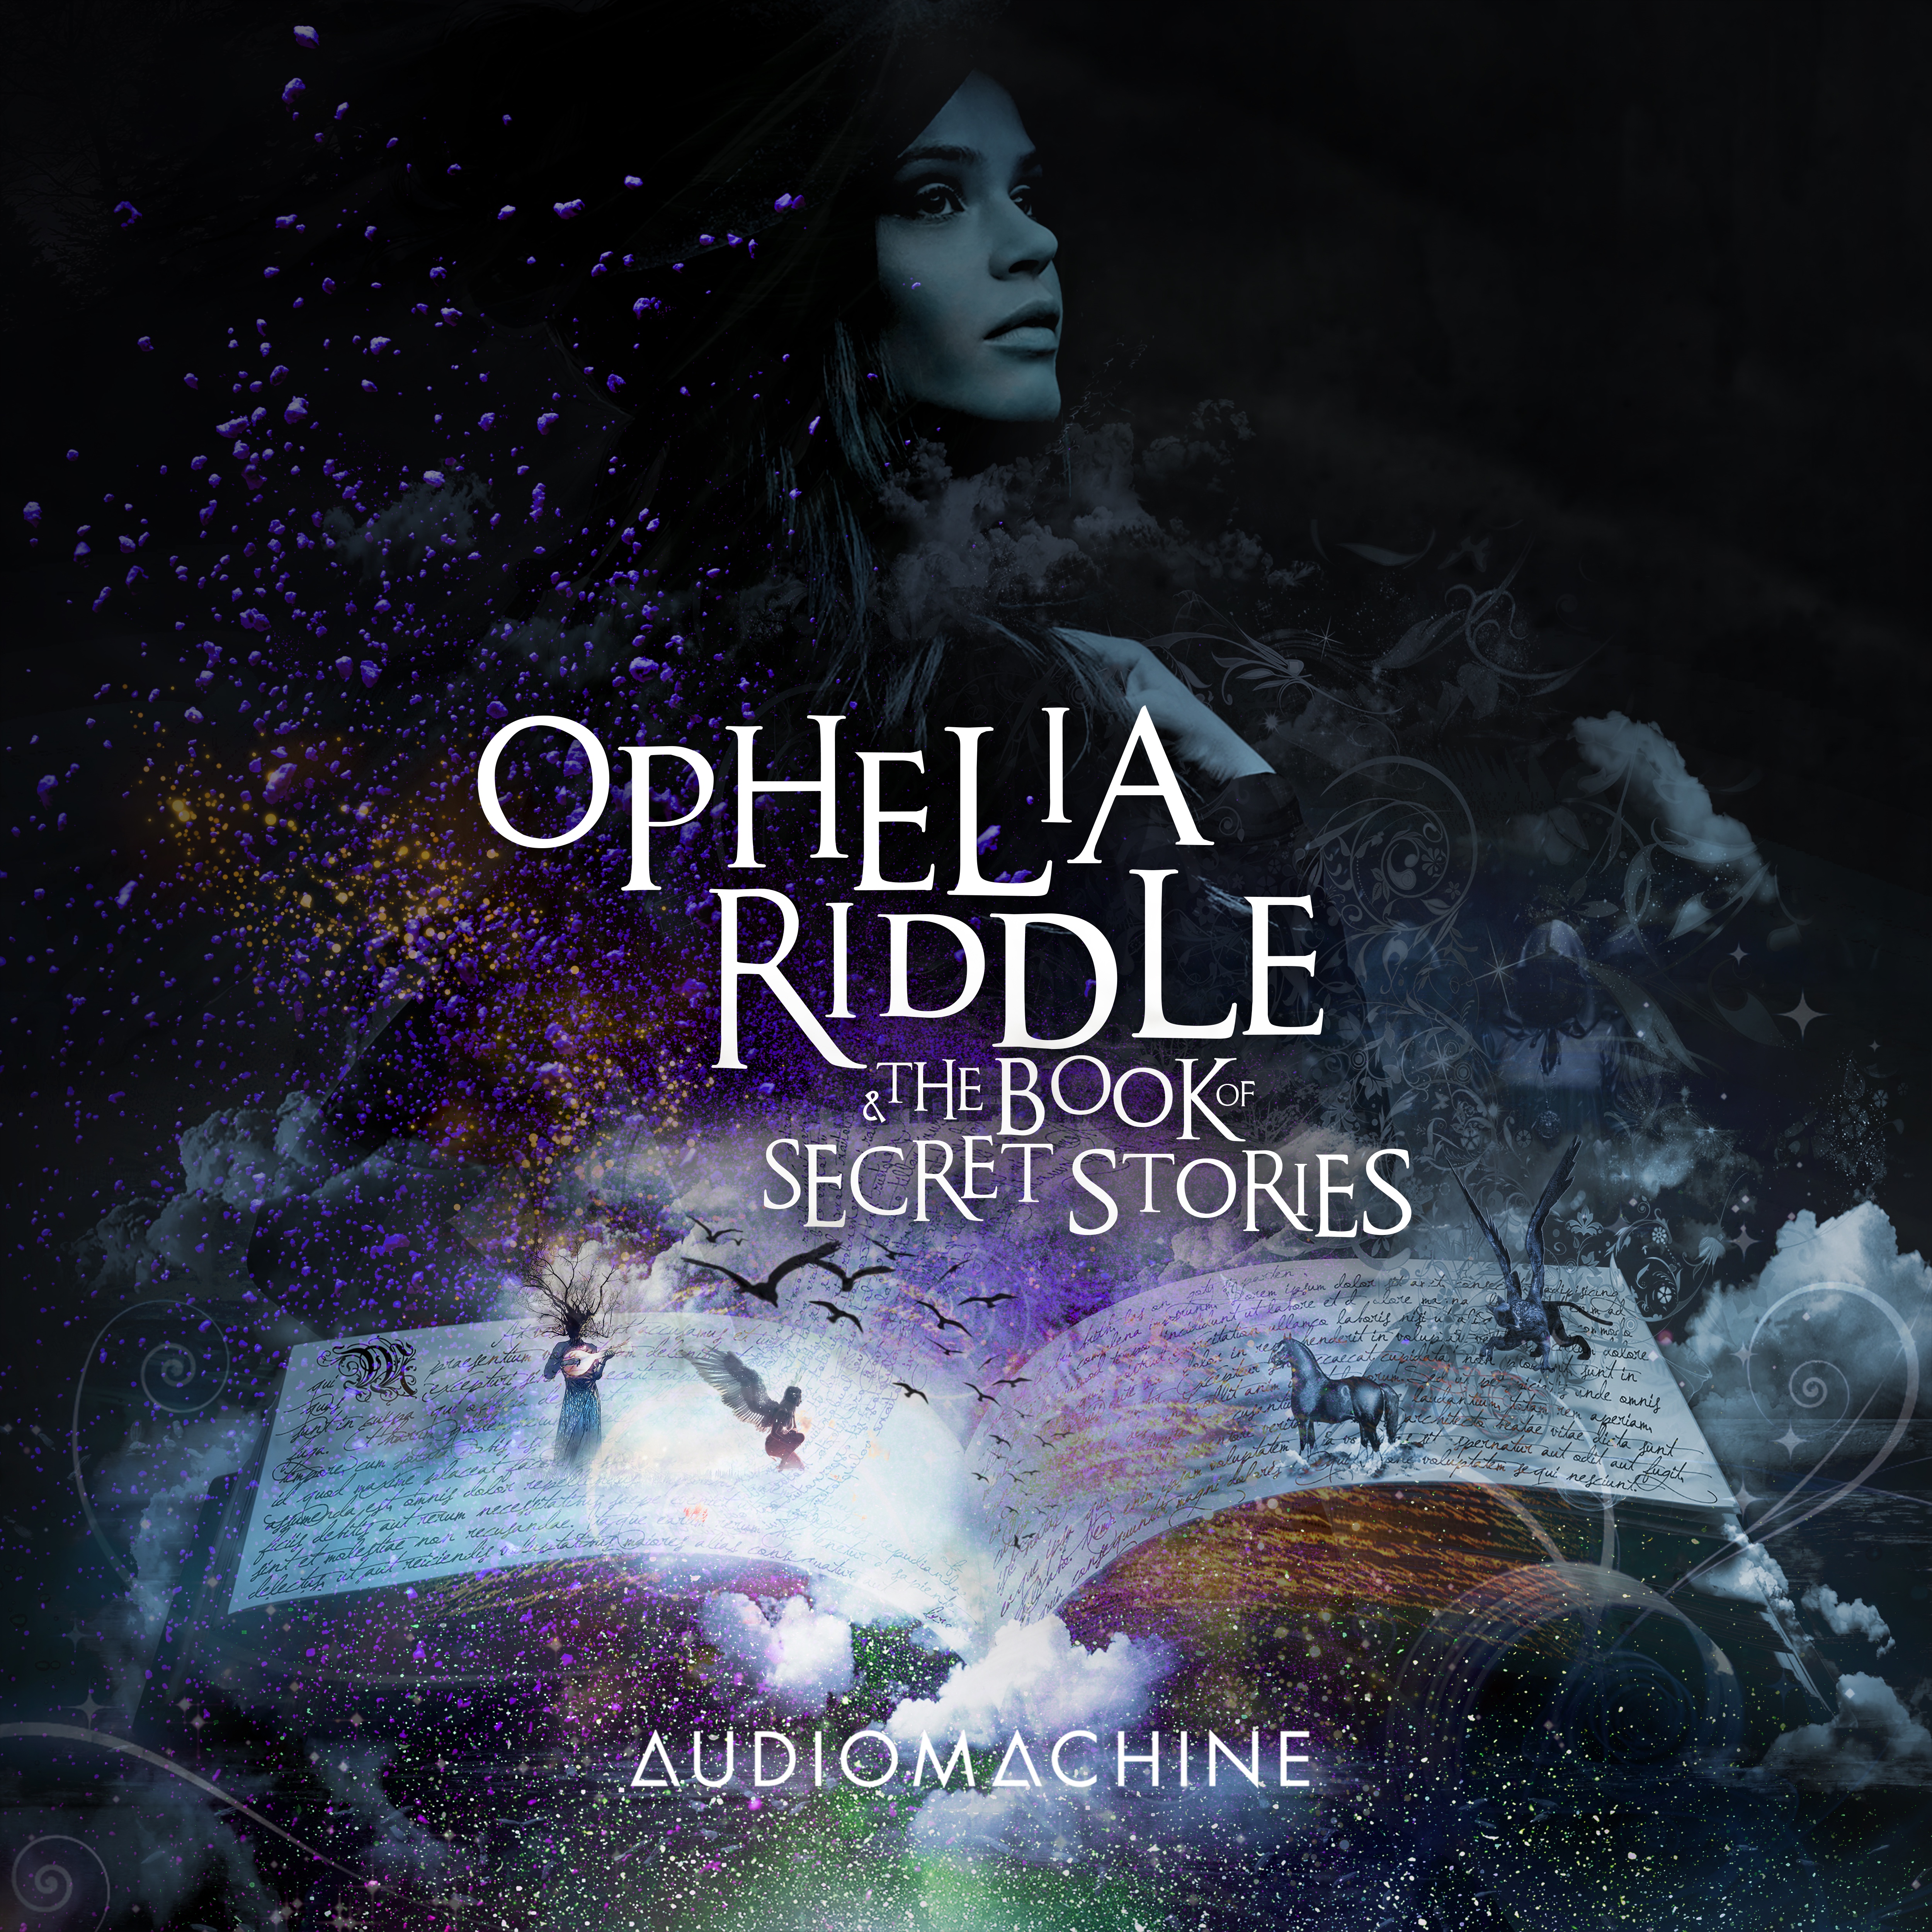 Ophelia Riddle and the Book of Secret Stories